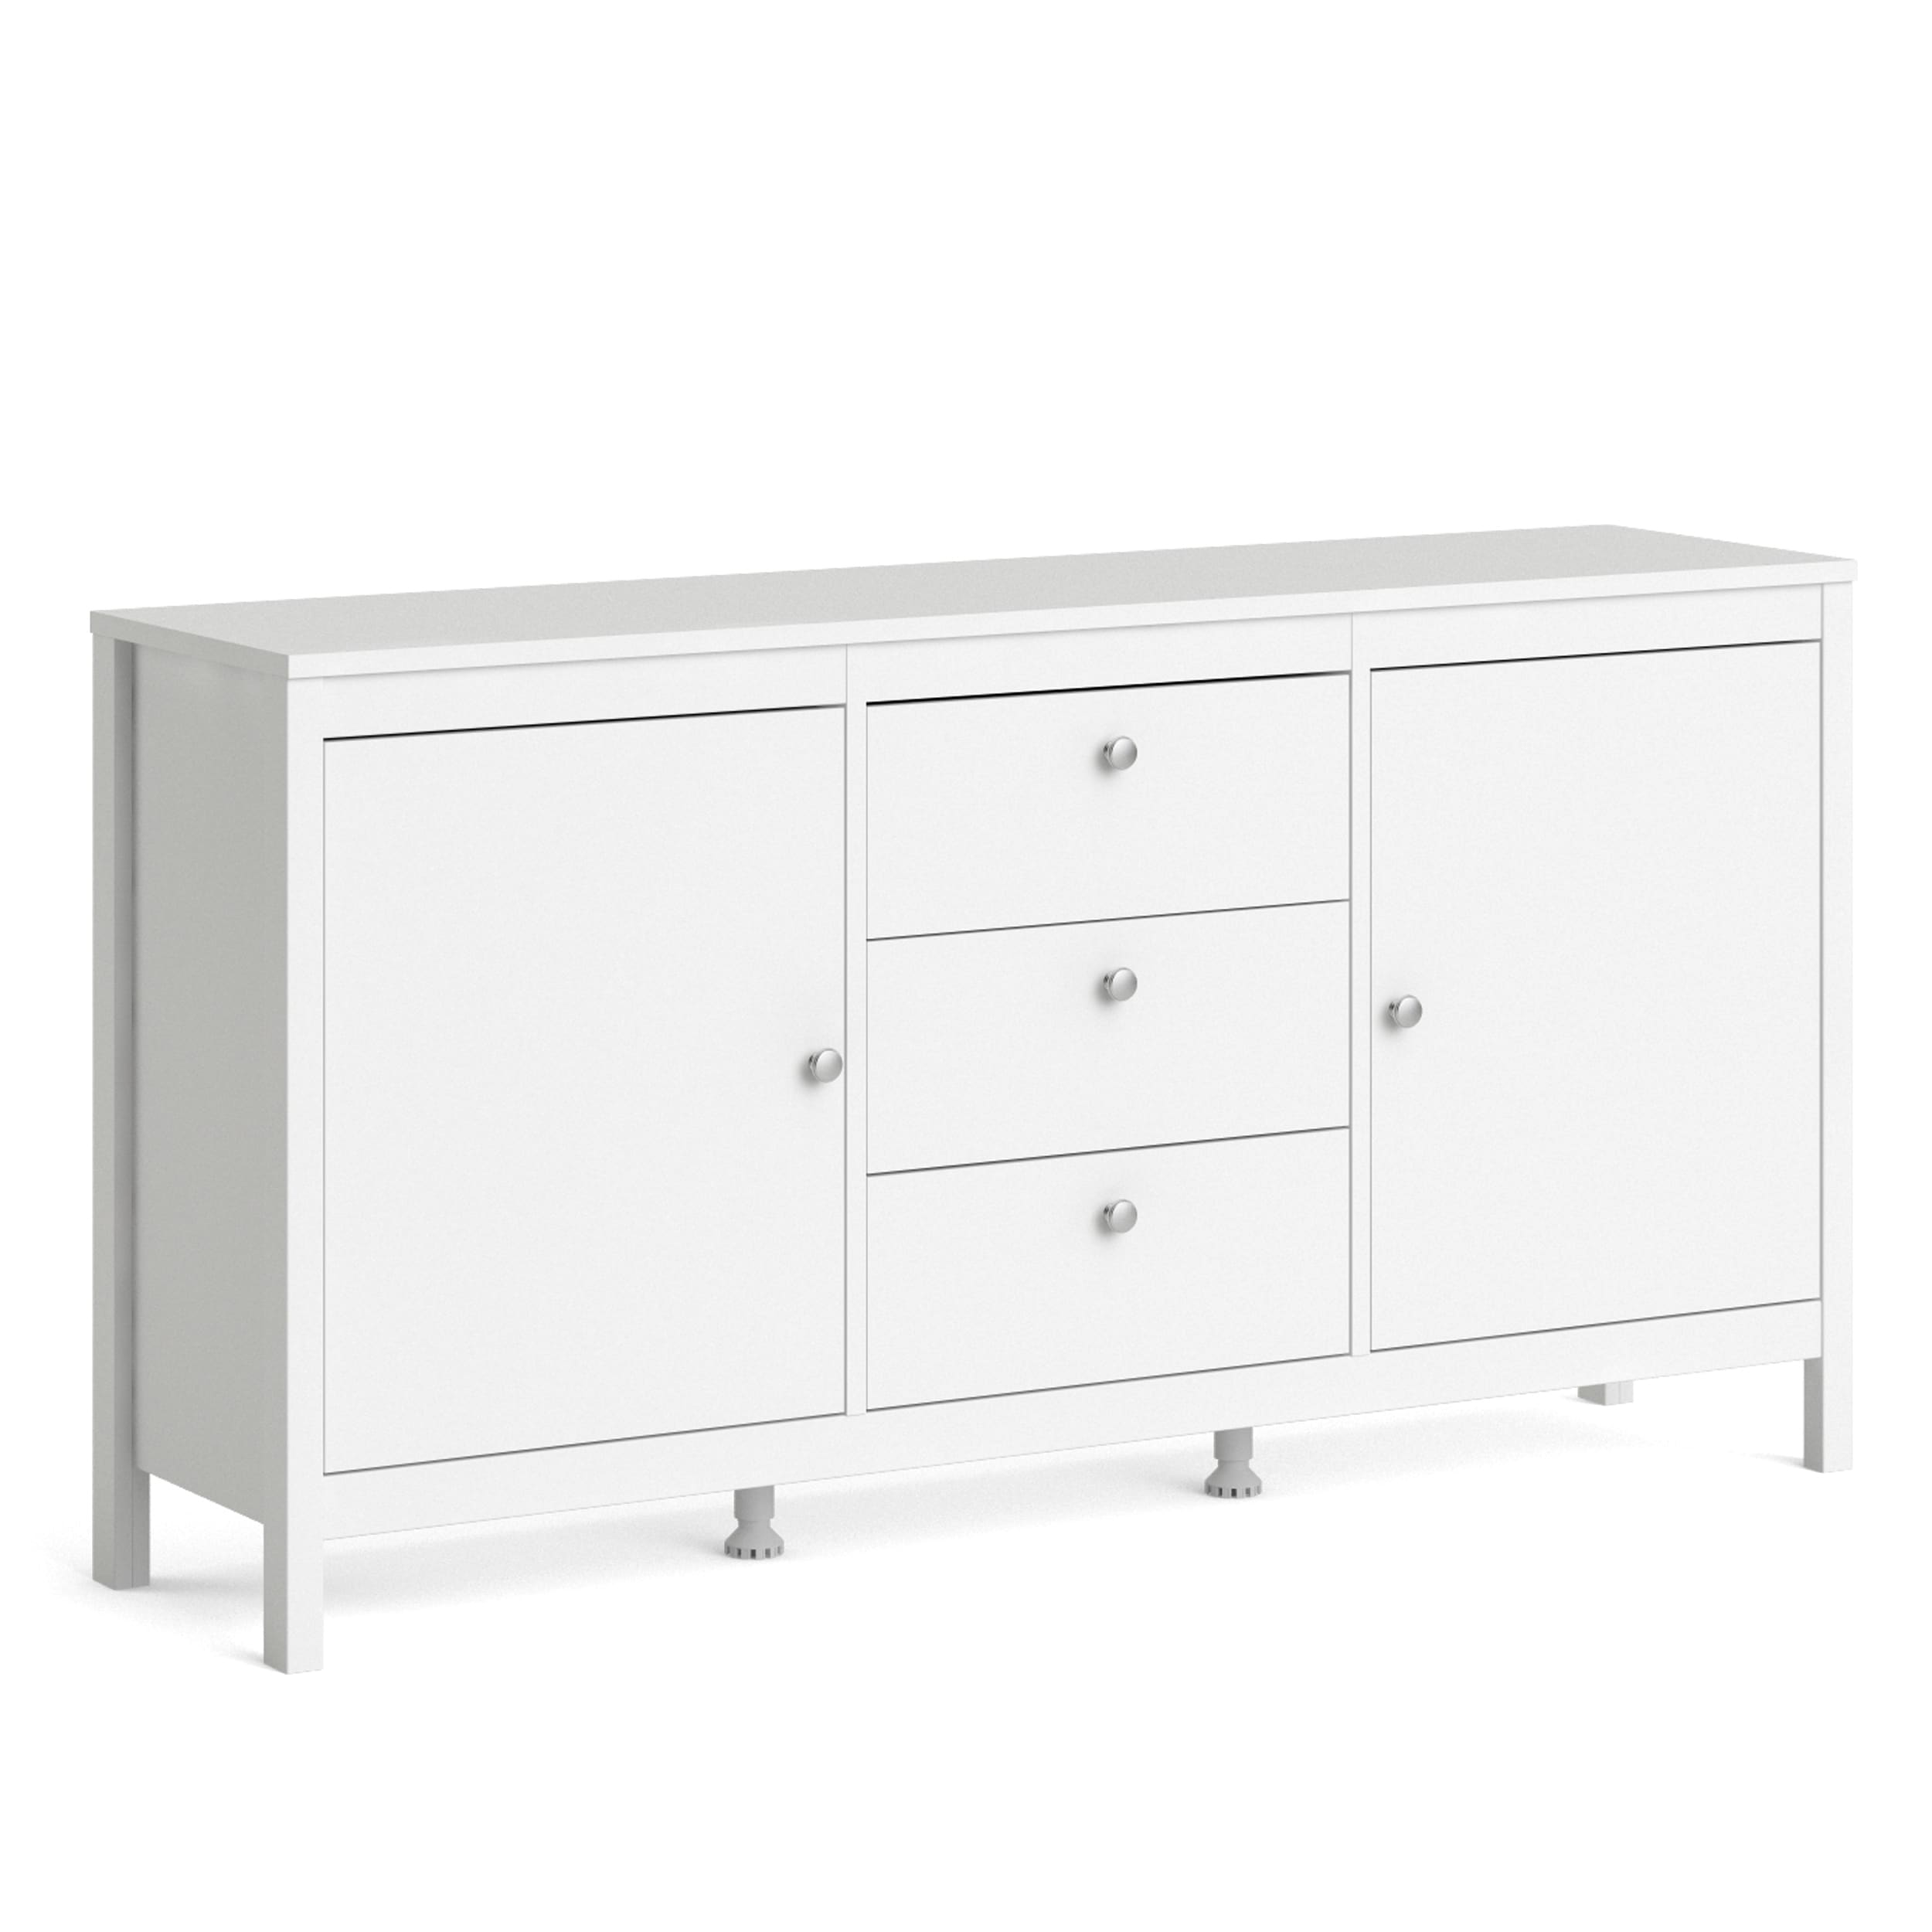 - 2-Door Bed Porch & 3-Drawers Beyond On with Madrid Sideboard Sale 33673465 Den - Bath & -